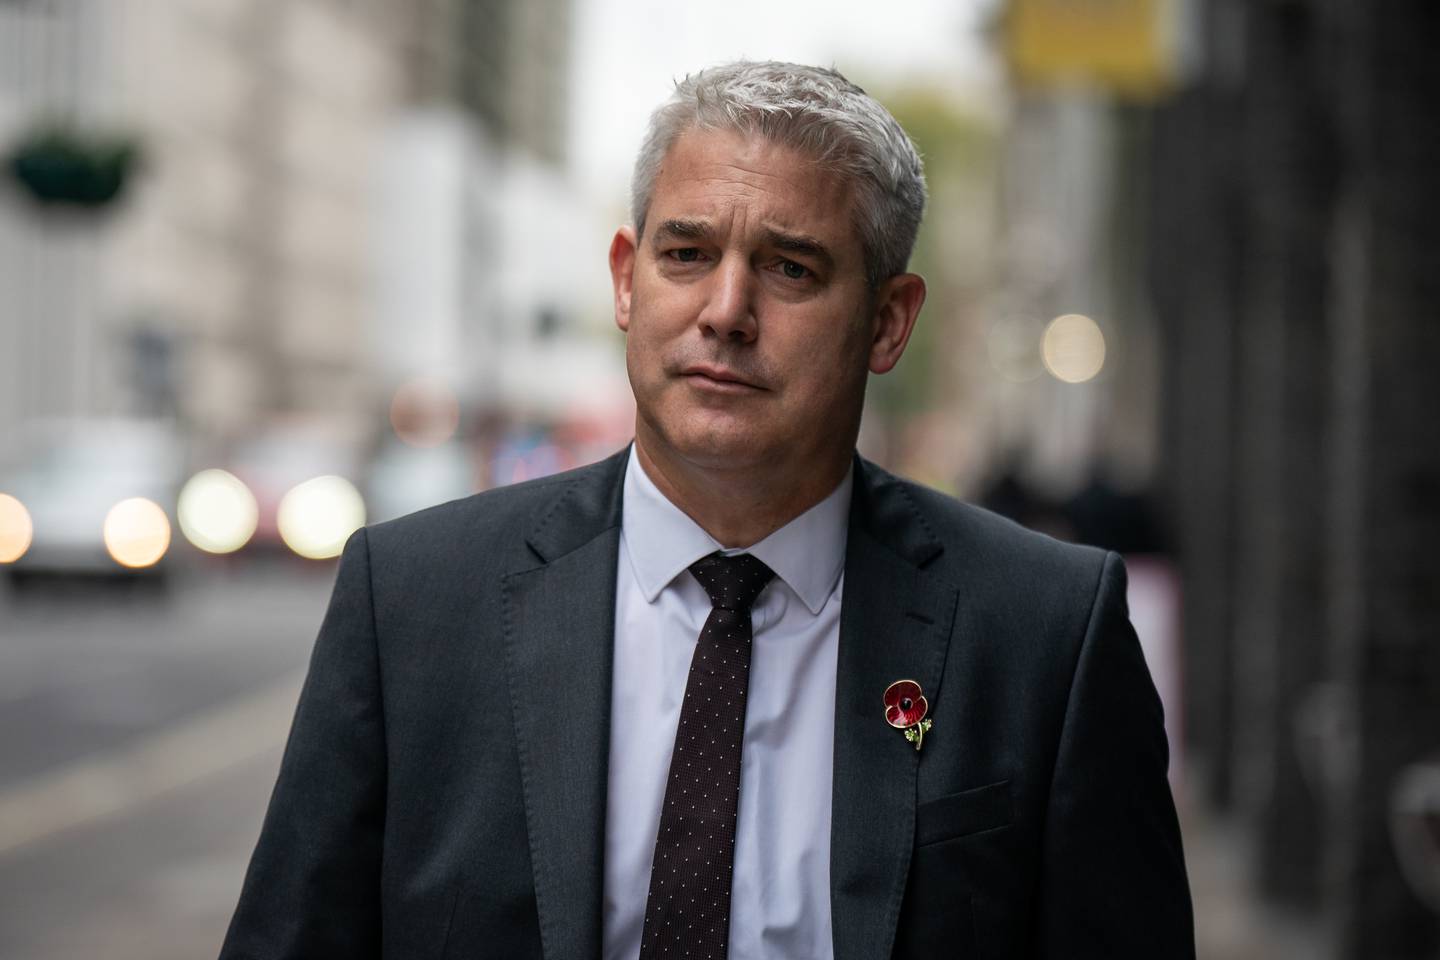 UK Health Secretary Steve Barclay voiced his gratitude for 'the hard work and dedication of nurses' but said he rued the decision for strike action. PA